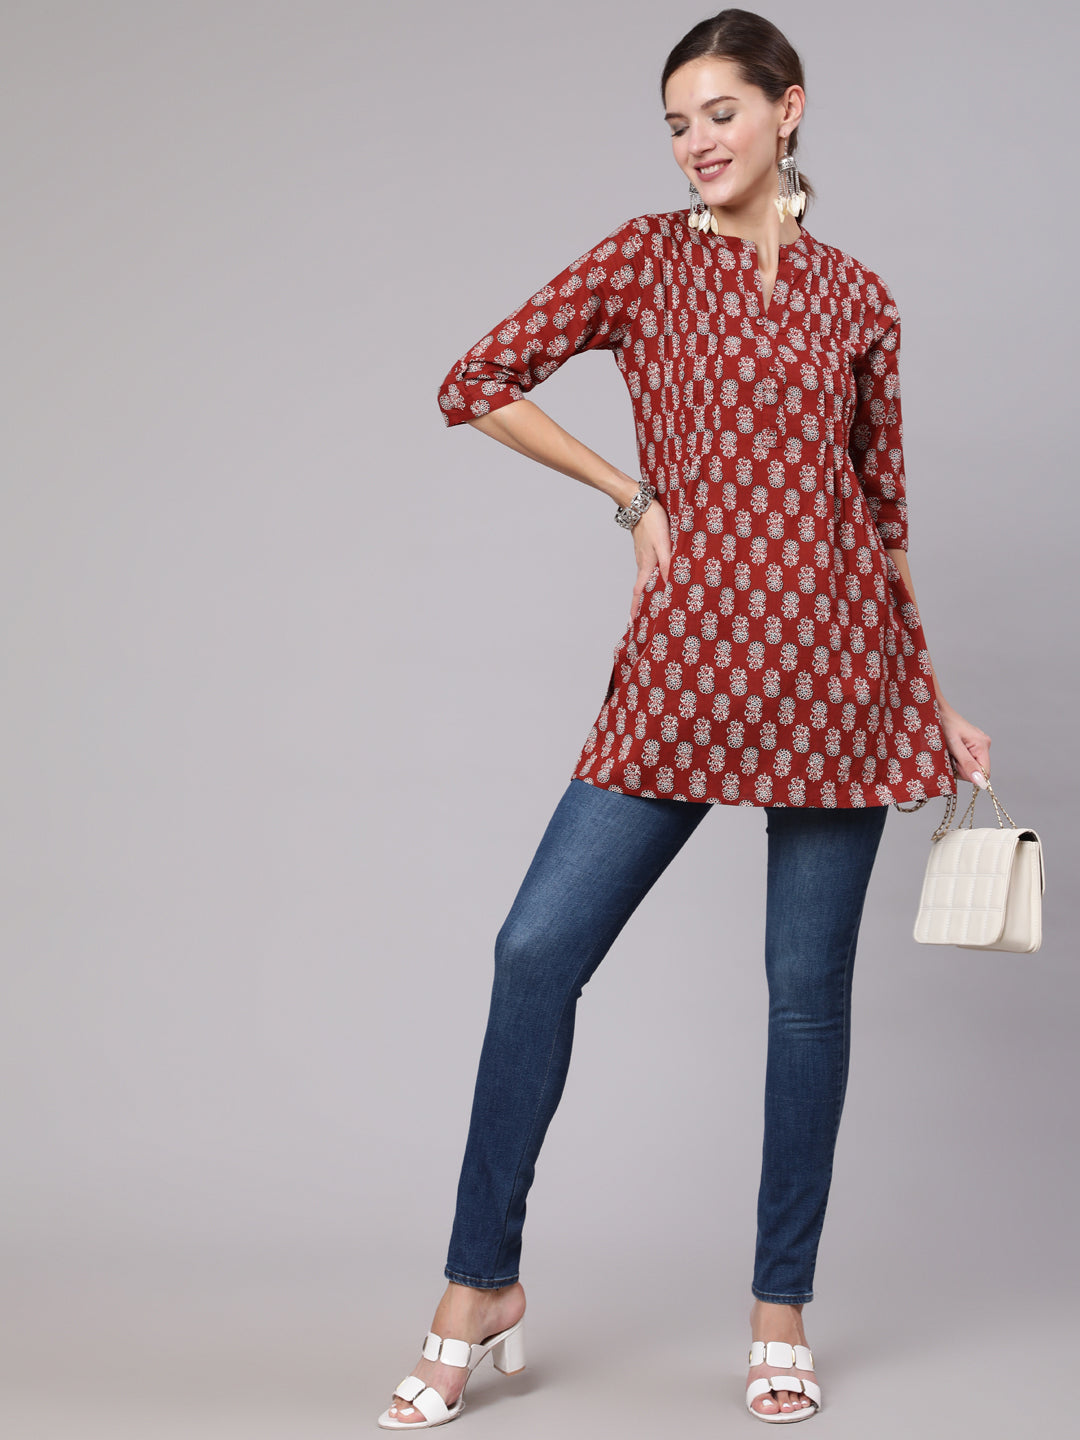 Women's Maroon Ethnic Printed Straight Tunic With Three Quarter Sleeves - Nayo Clothing